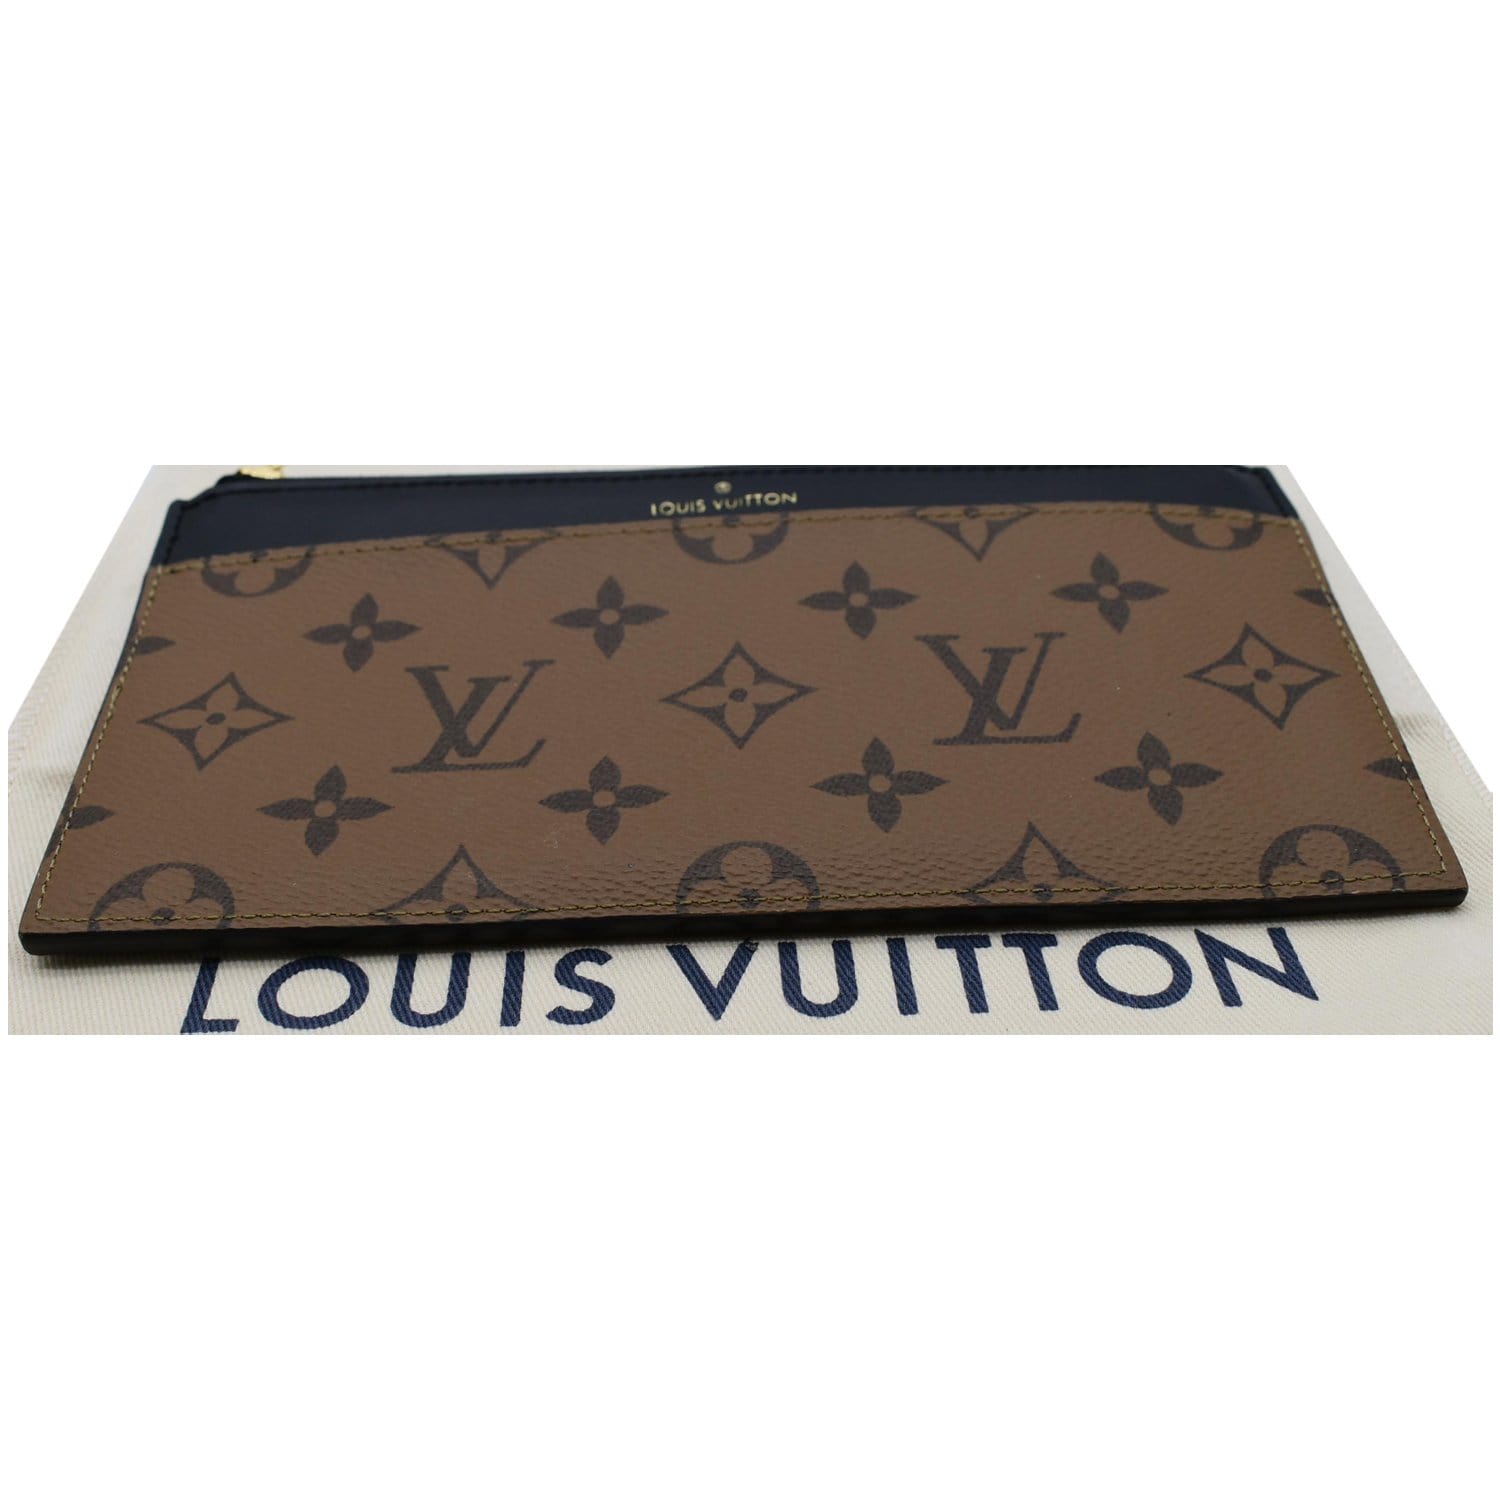 Louis Vuitton Wallet Brown - $345 (56% Off Retail) - From NorB